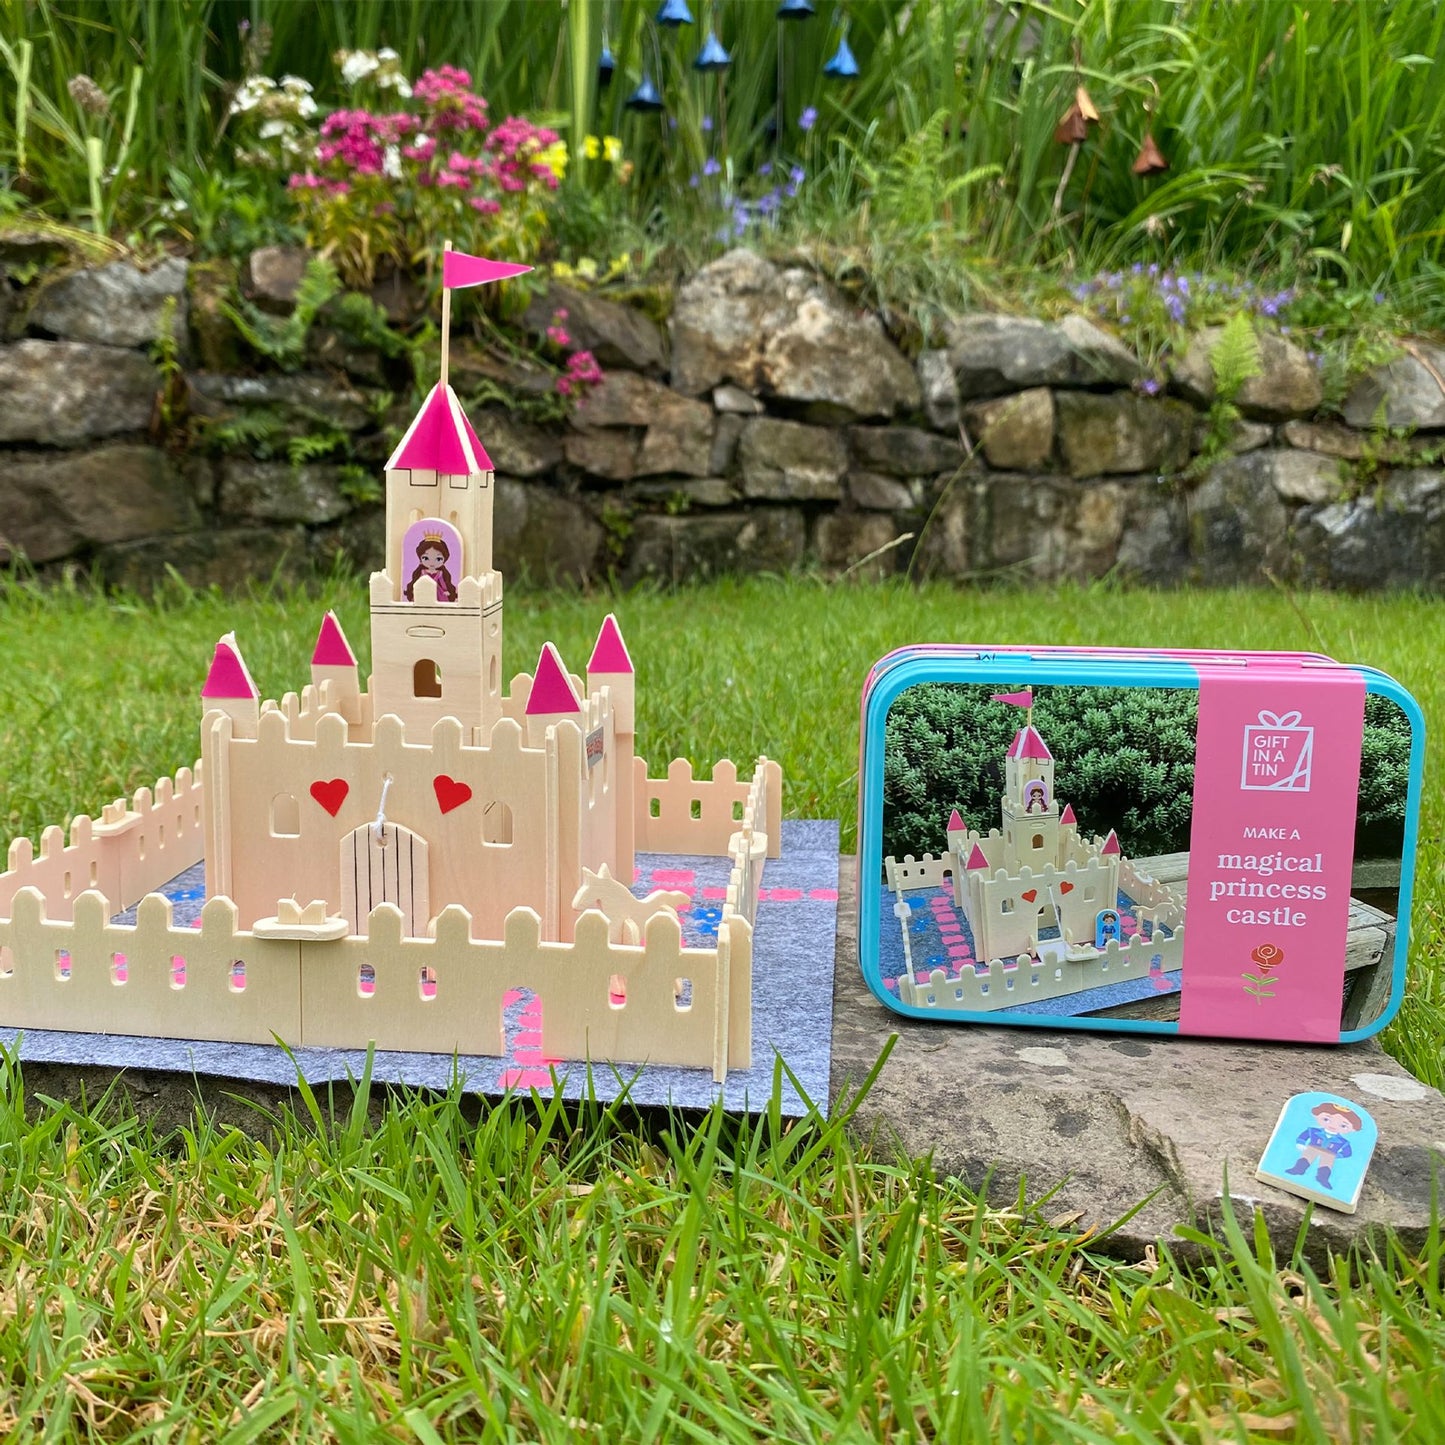 Gift In A Tin Magical Princess Castle